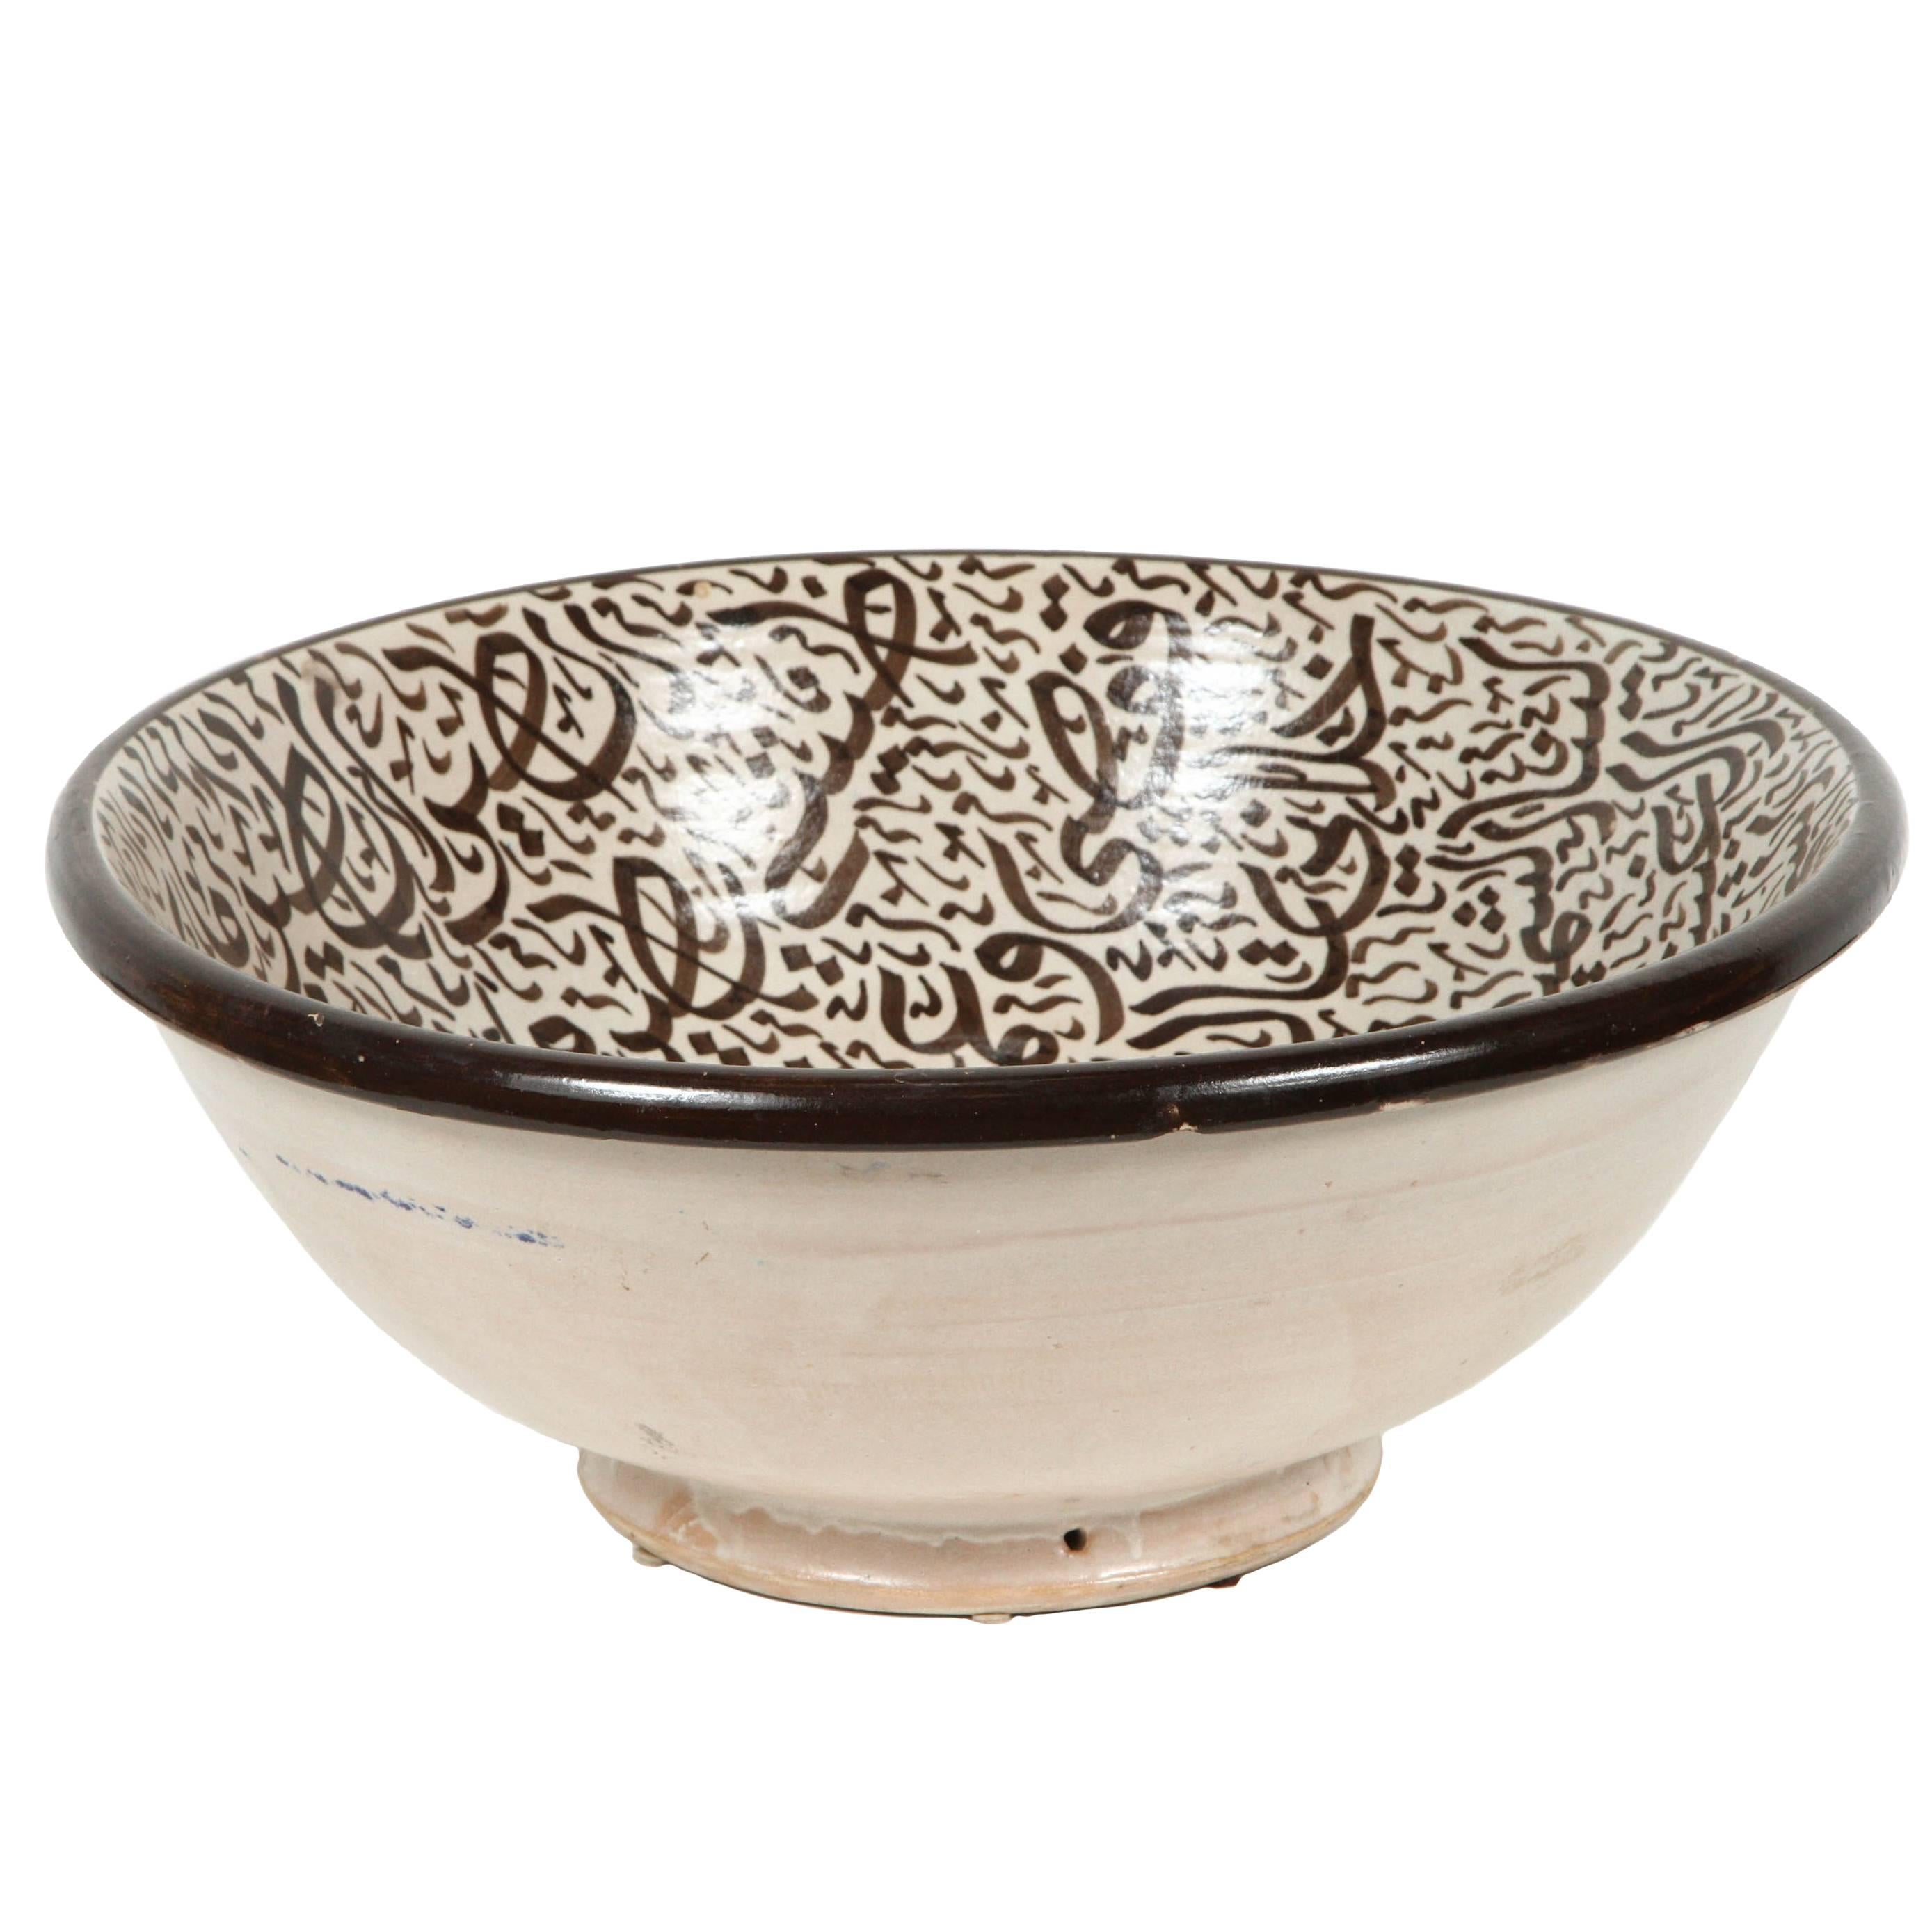 Moroccan Ceramic Bowl with Arabic Calligraphy